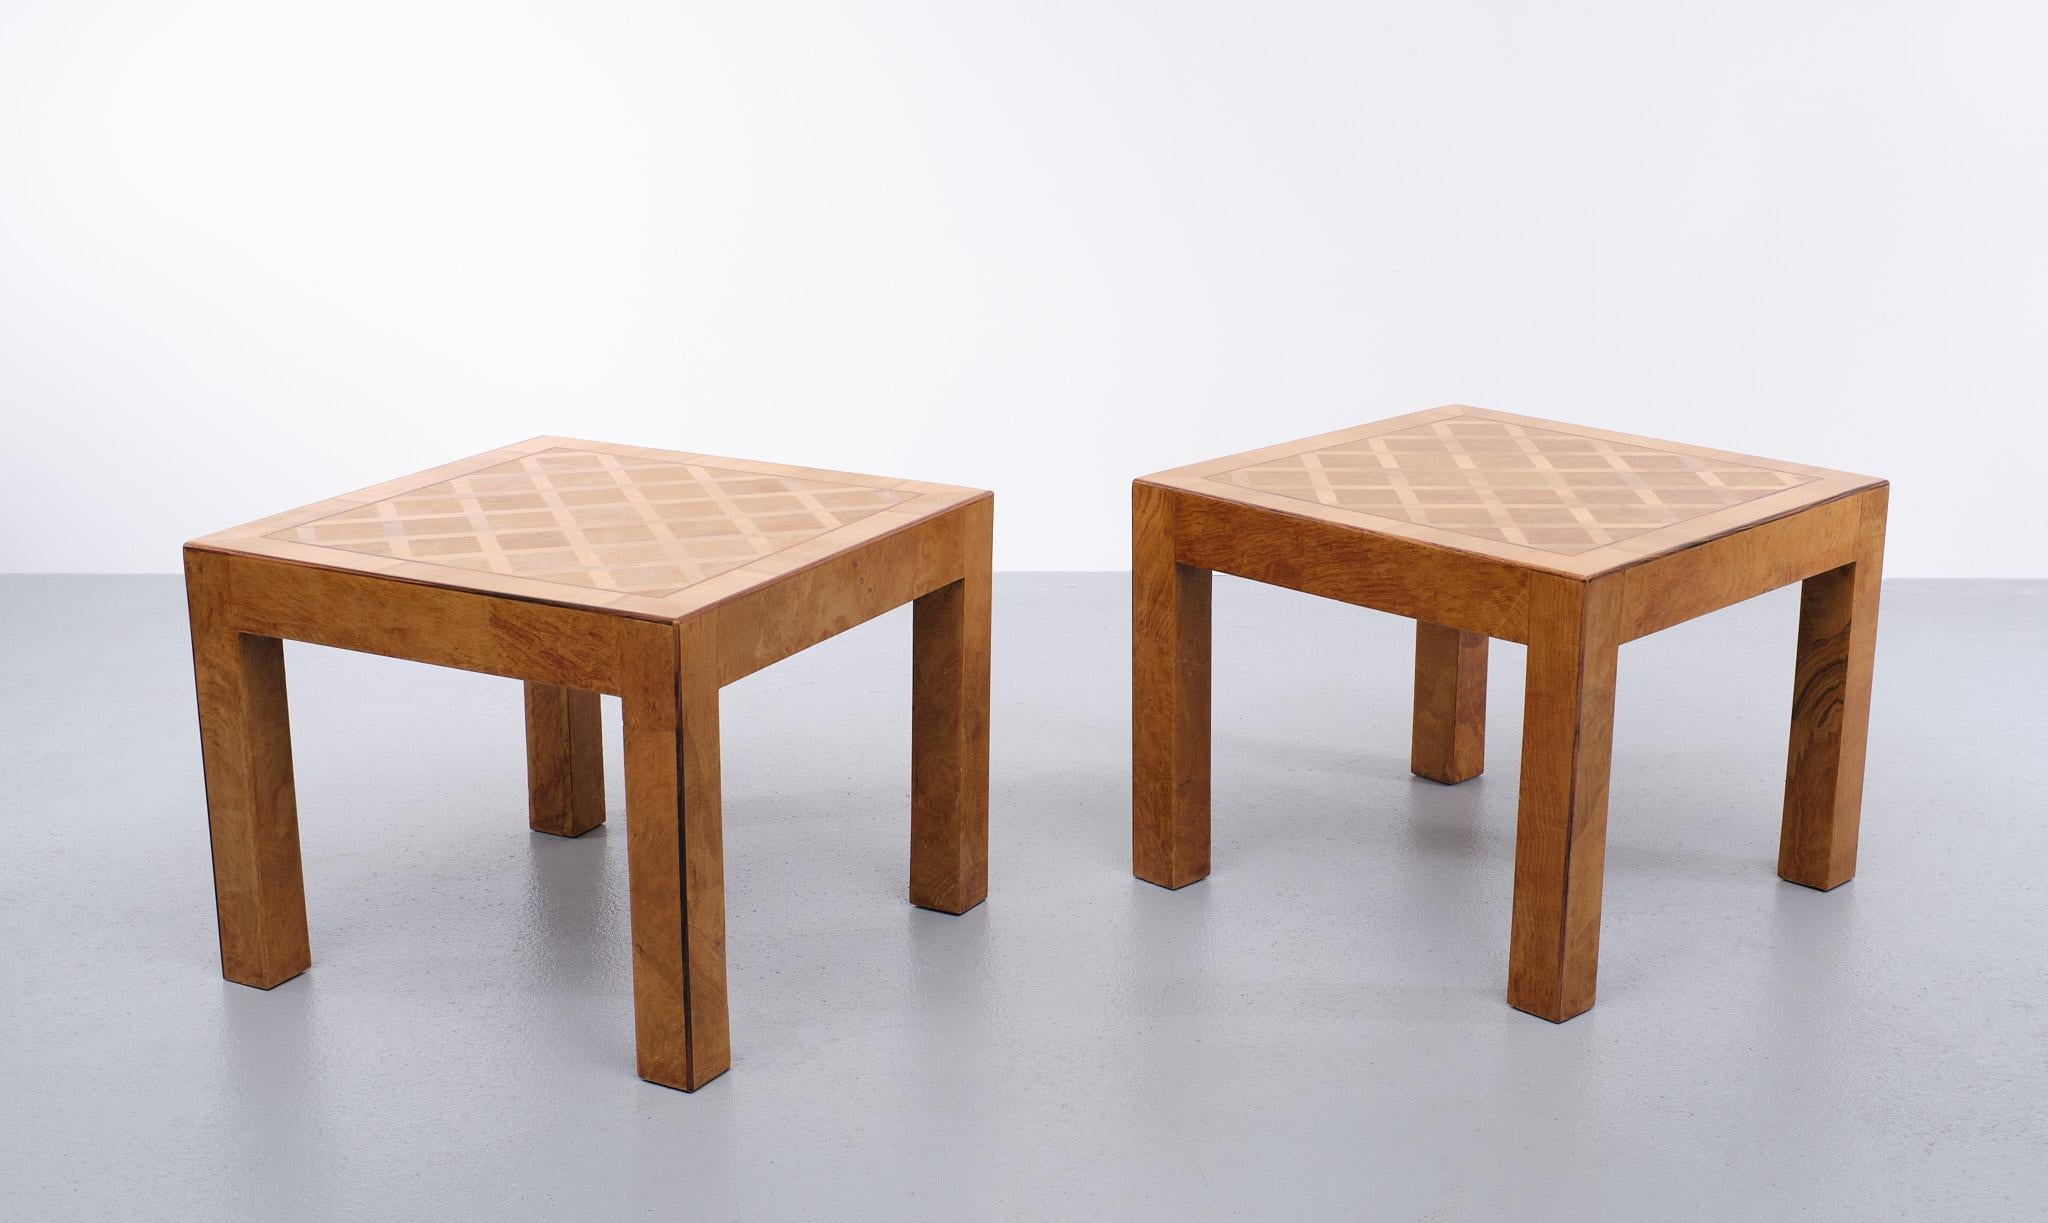 Italian Checkerboard Inlay Side Tables, 1960s For Sale 2